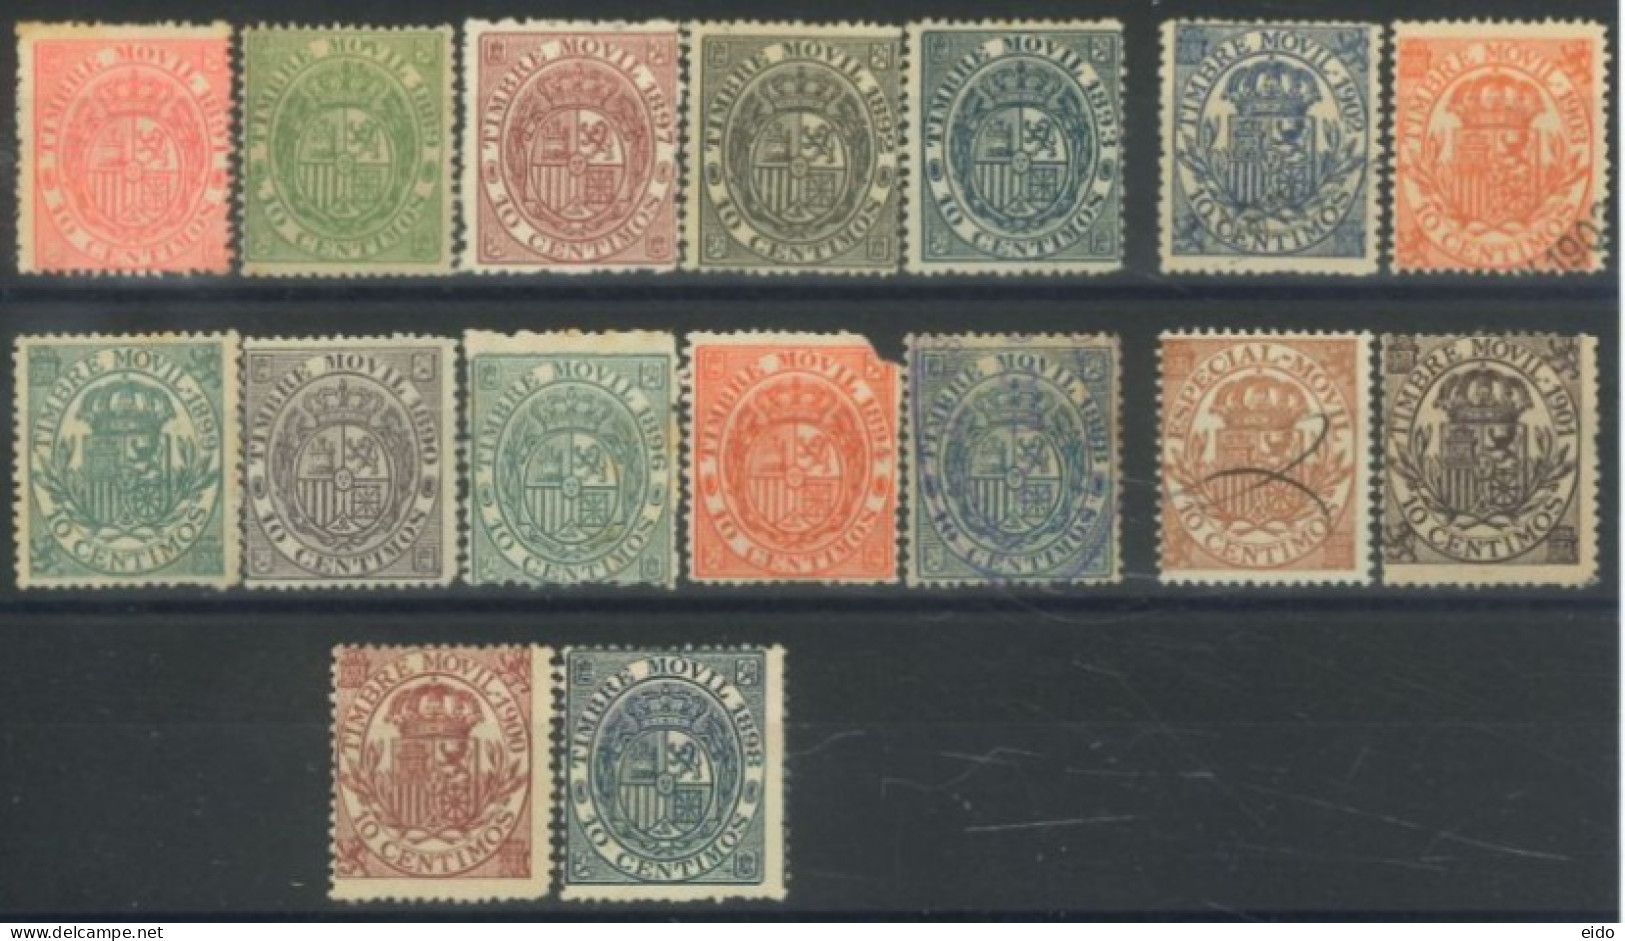 SPAIN, 1888/1903, REVENUE ADHESIVE STAMPS SET OF 16, MOSTLY MINT NO GUM (MNG), ONLY 3 STAMPS USED. - Nuovi